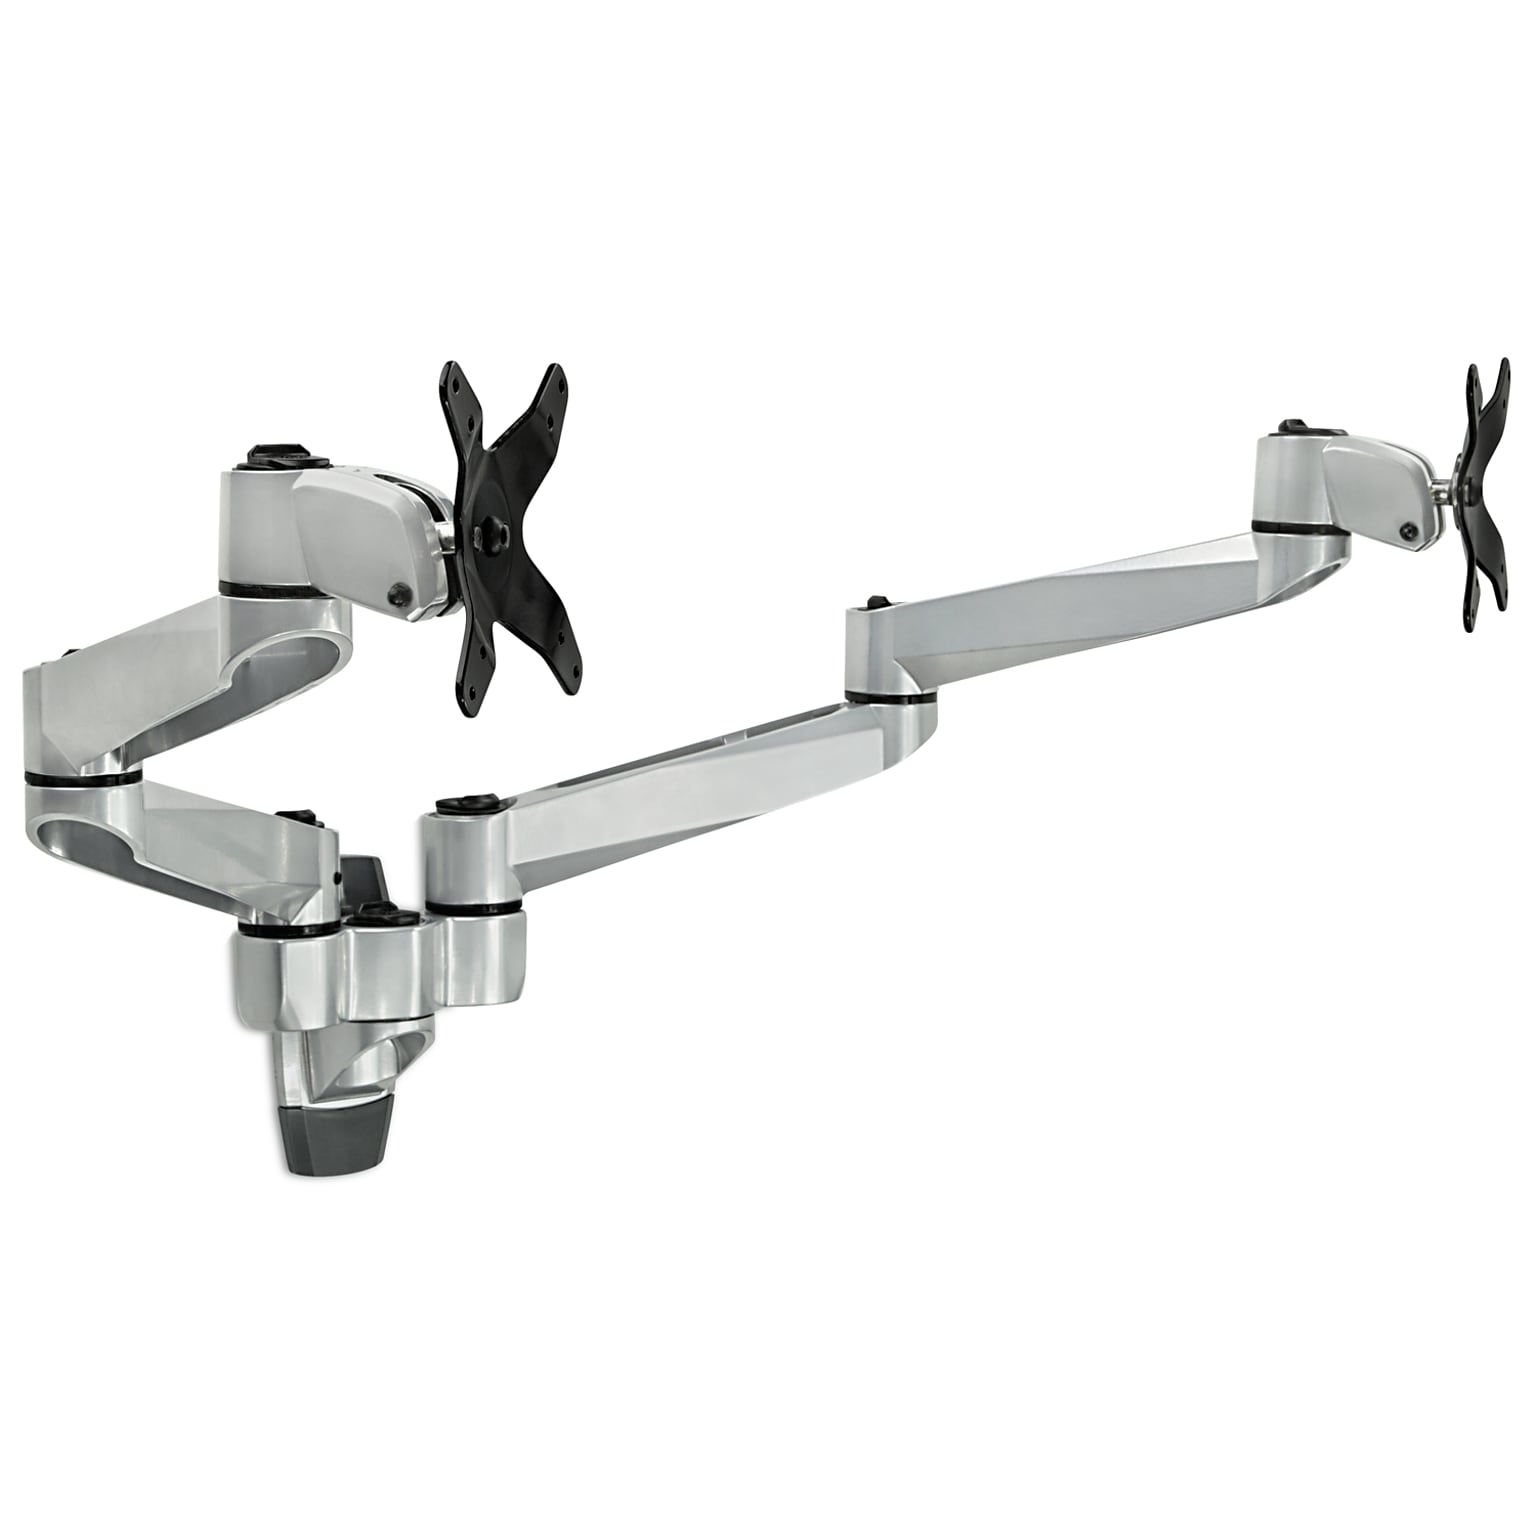 Mount-It! Modular Dual Adjustable Monitor Arms, Up to 30 Monitors, Gray/Silver (MI-43114)